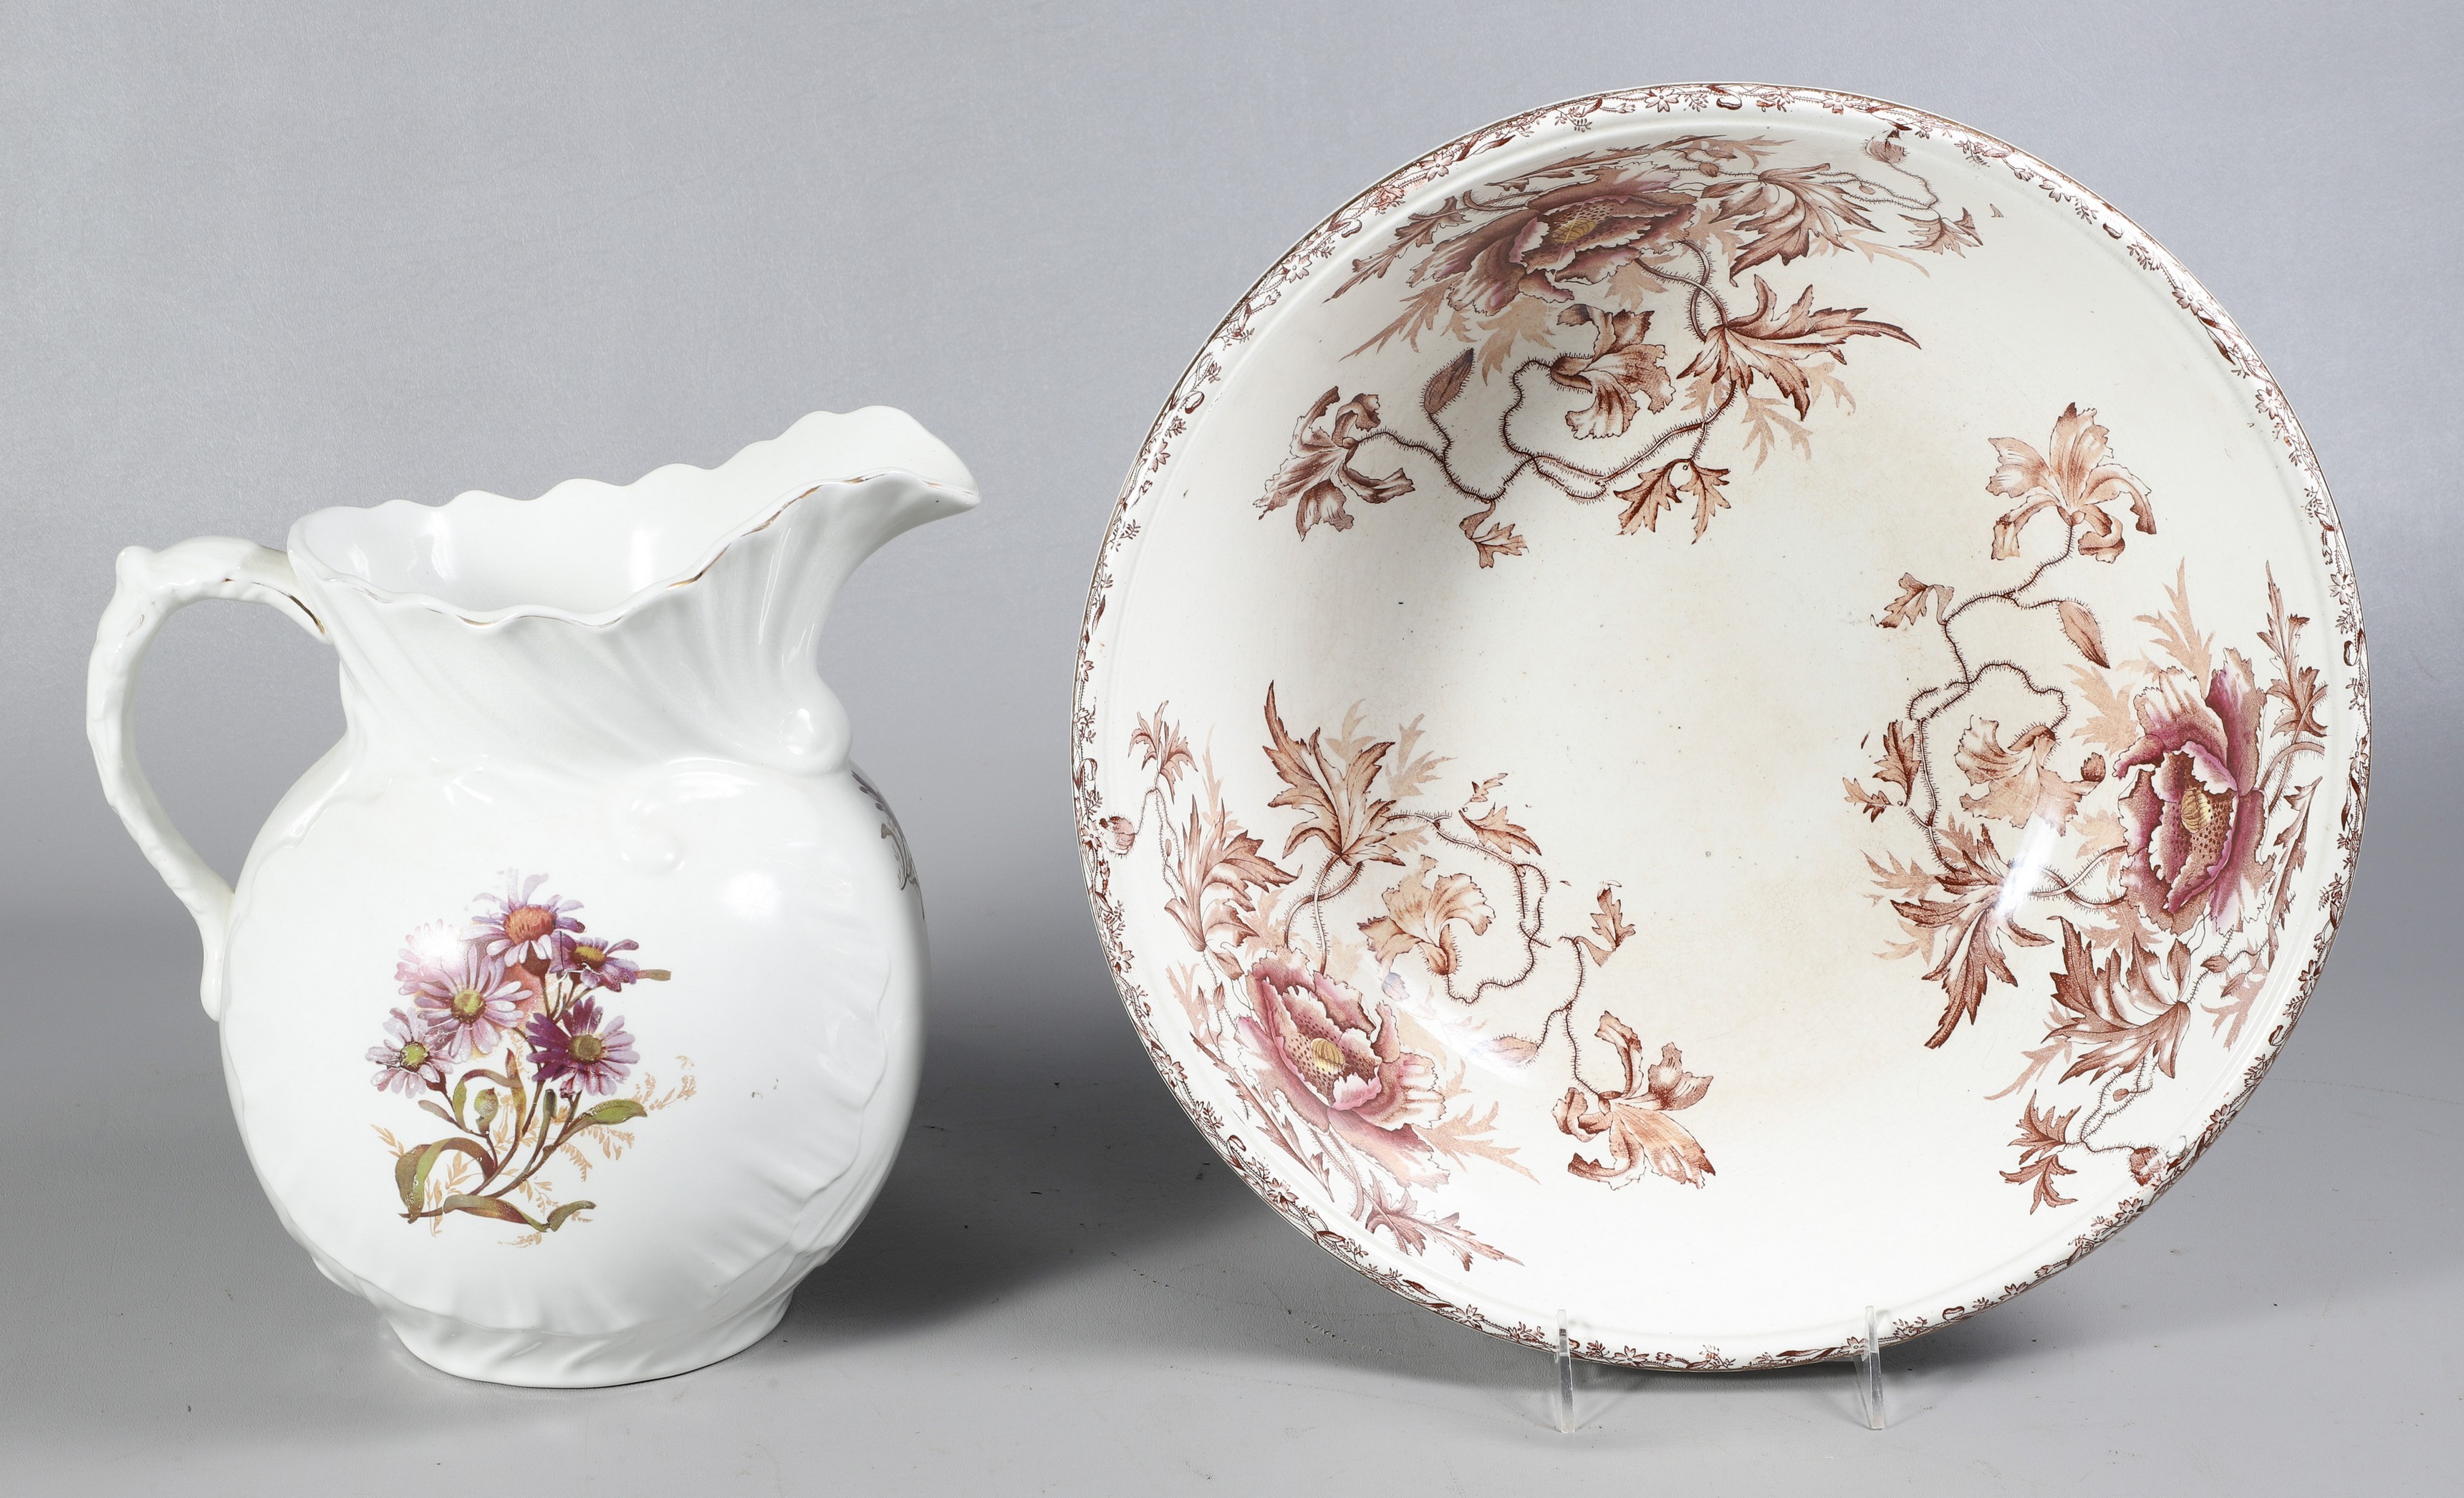 Transferware pitcher and basin in floral